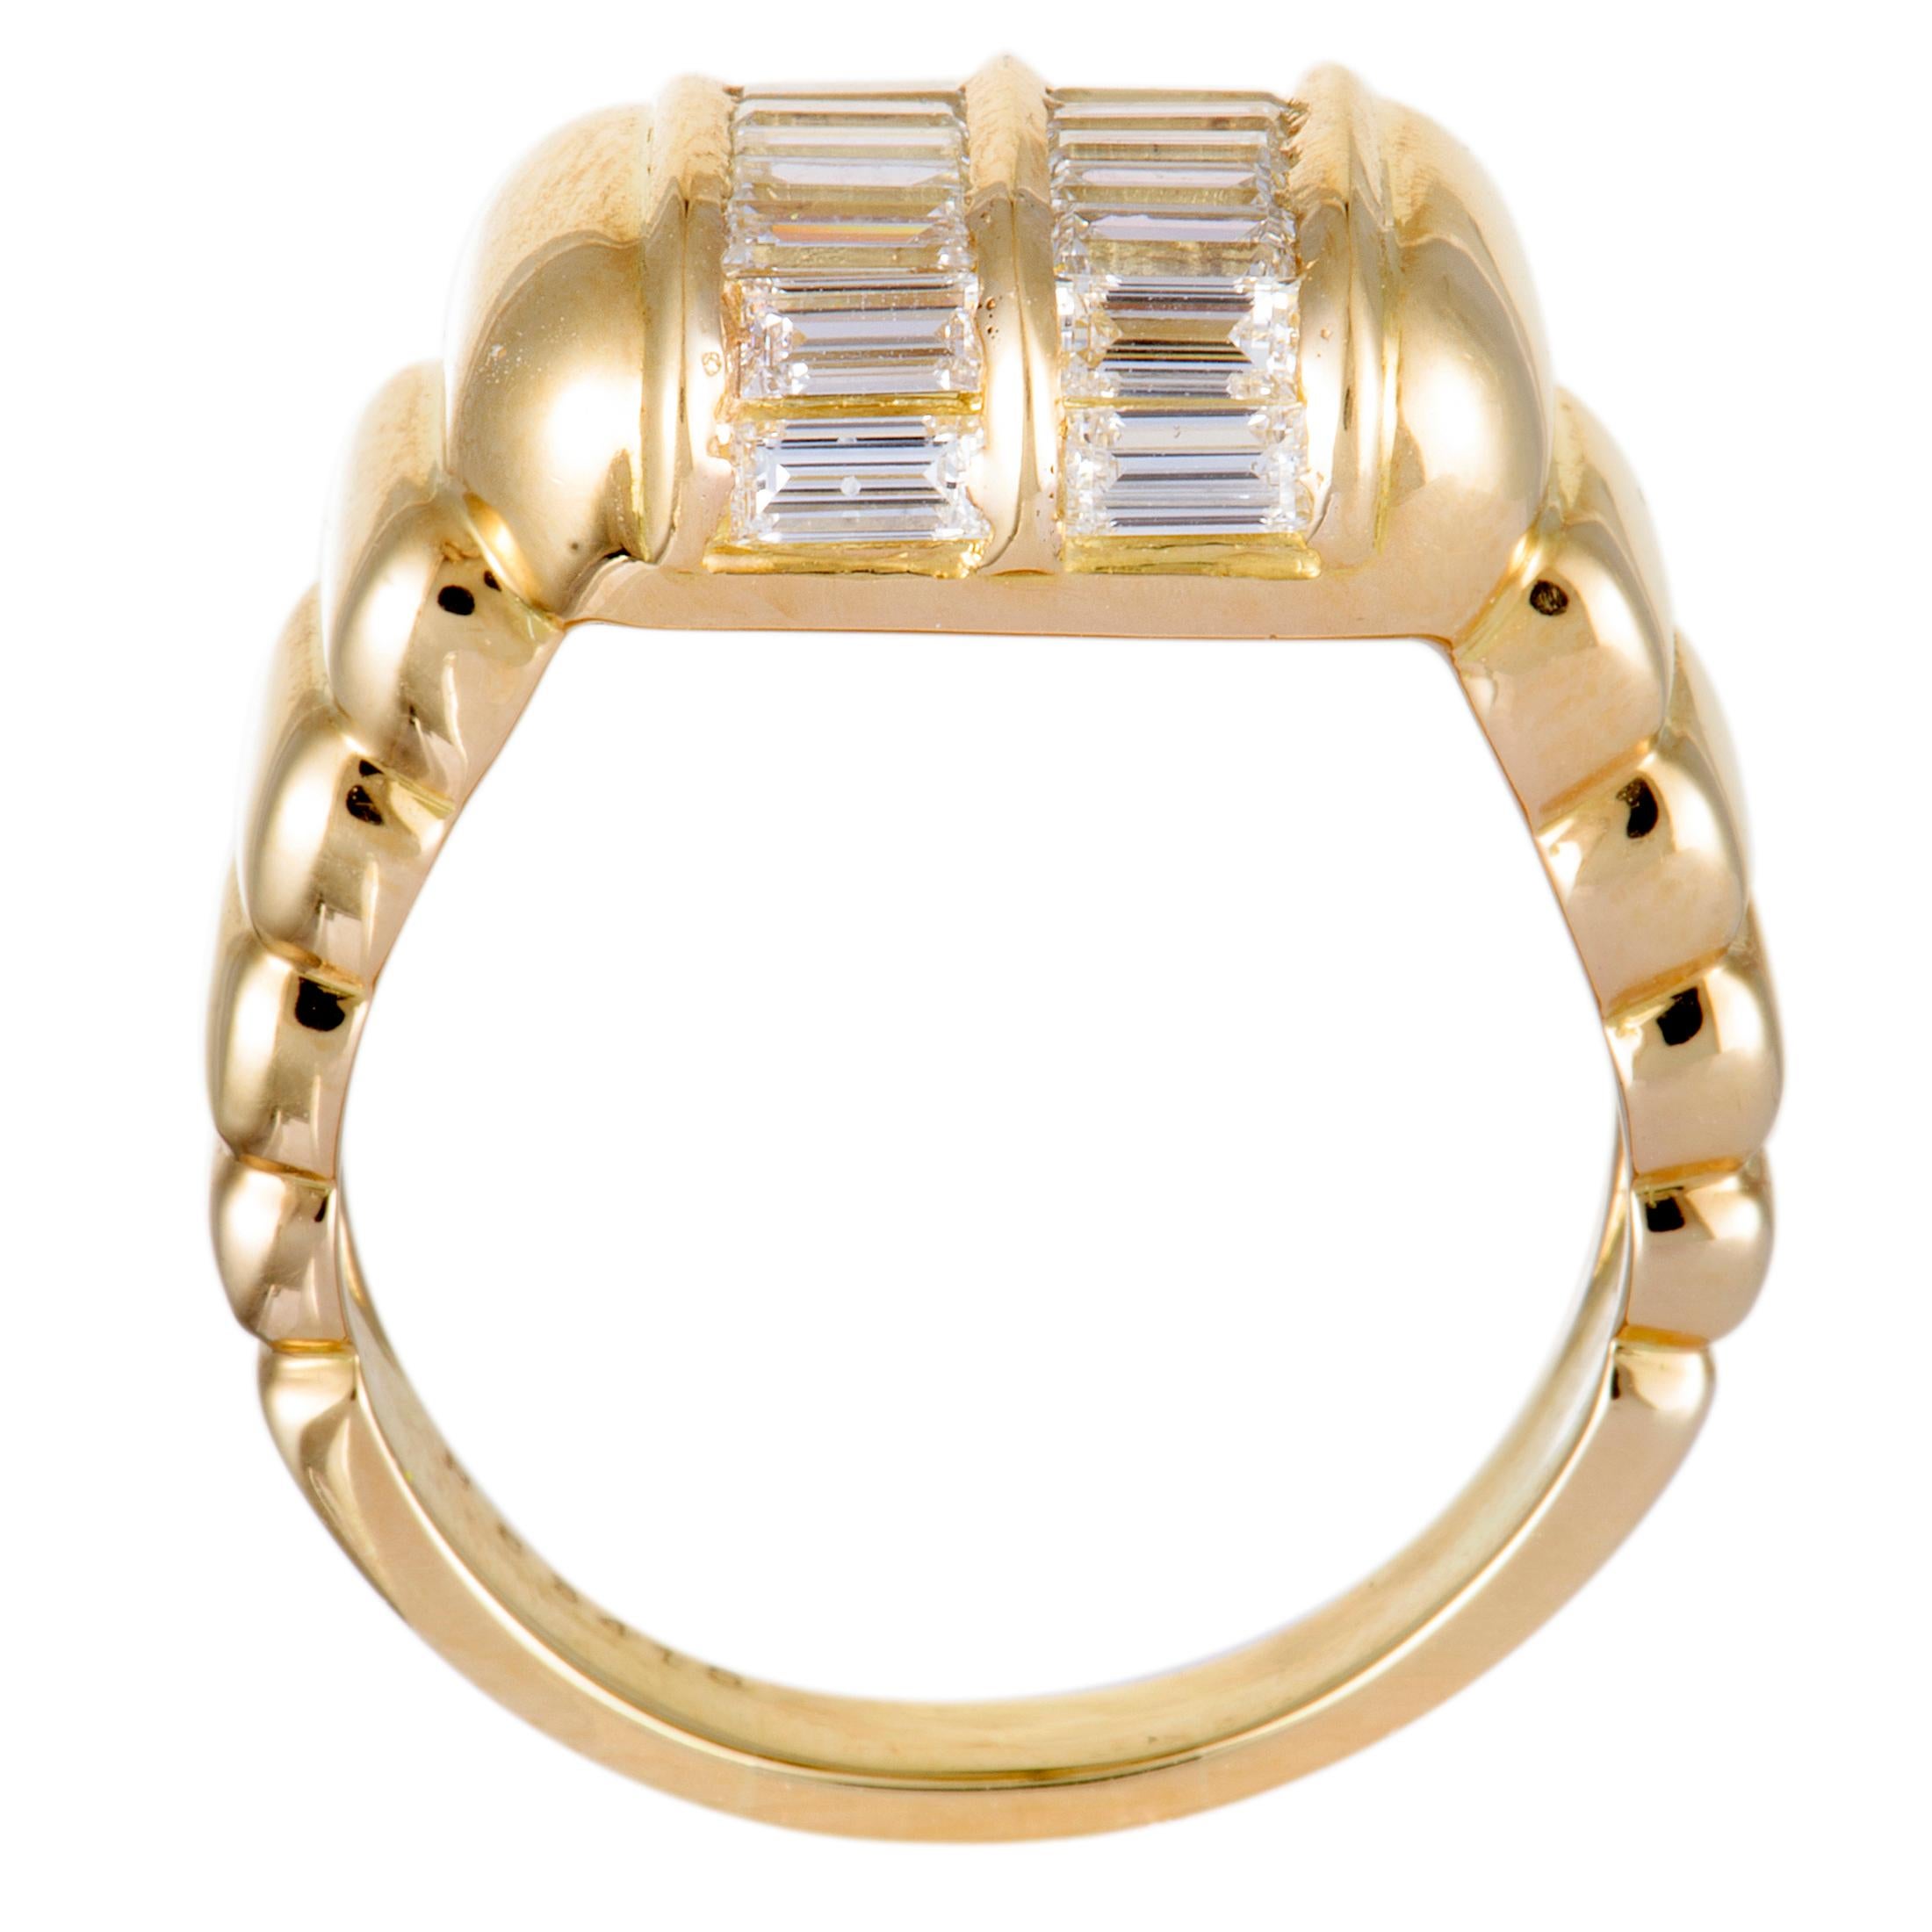 With an exceptionally prestigious design that is luxuriously topped off with lustrous diamonds, this stunning Piaget ring offers an incredibly elegant appearance. The ring is made of stylish 18K yellow gold and it is set with colorless (grade F)